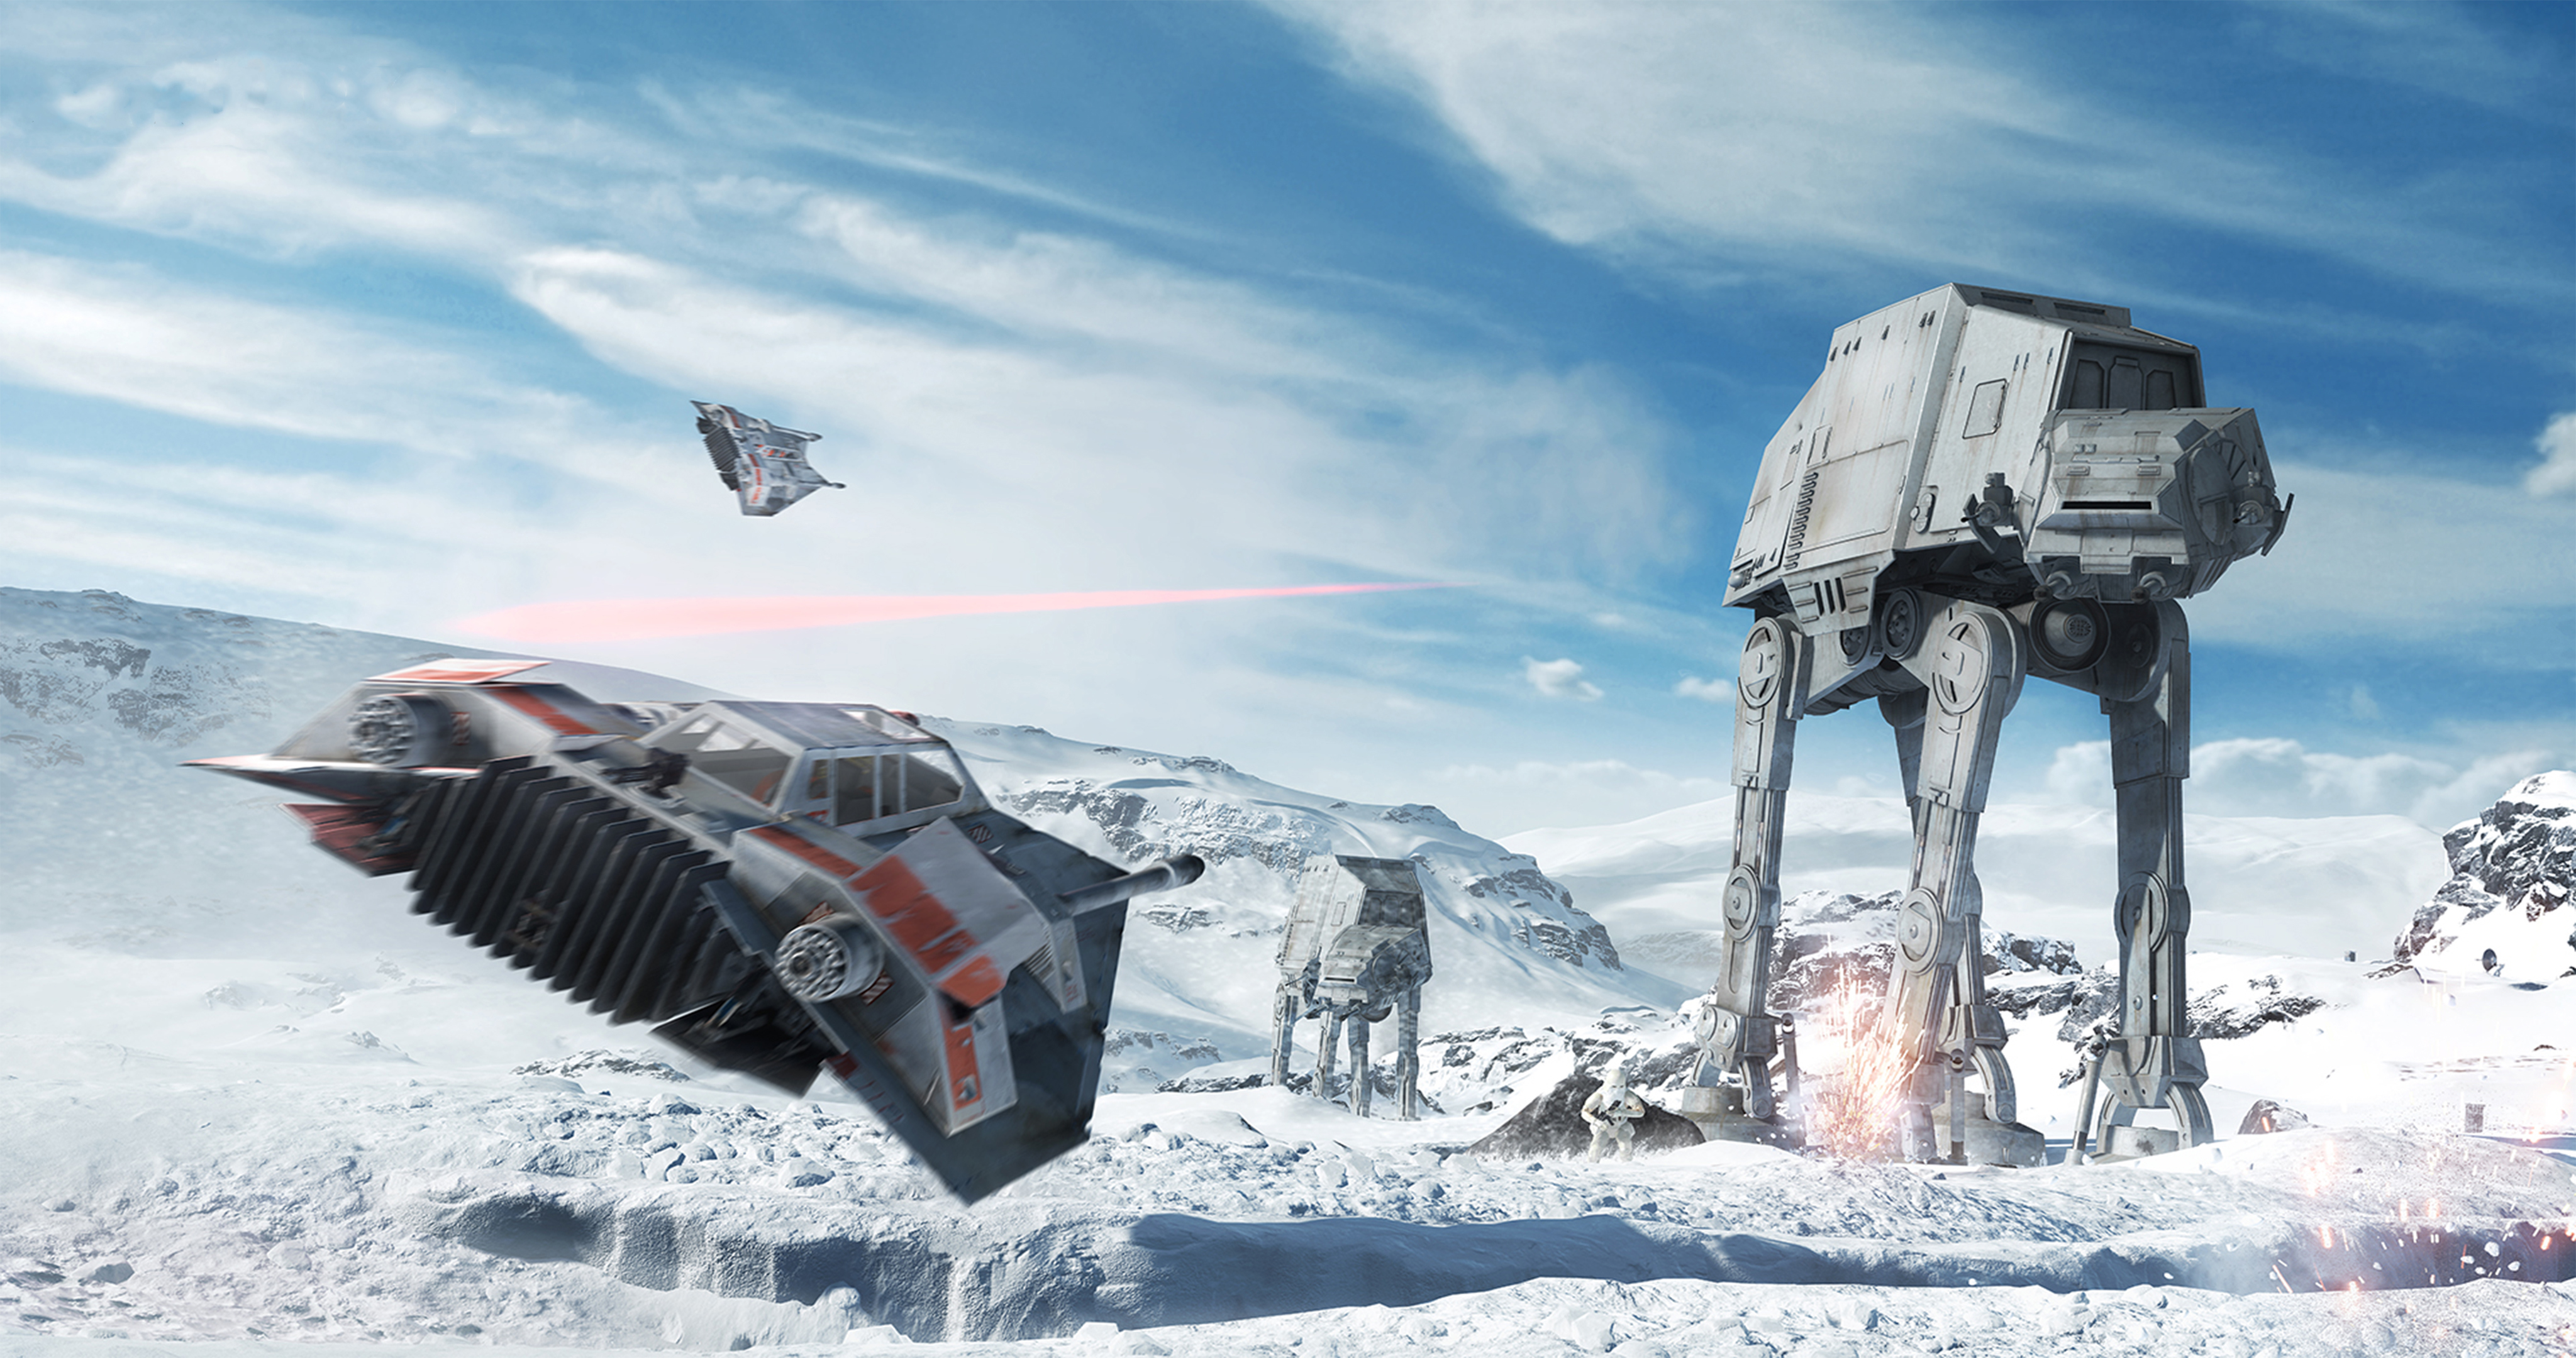 All Star Wars Battlefront Wallpaper Limited To